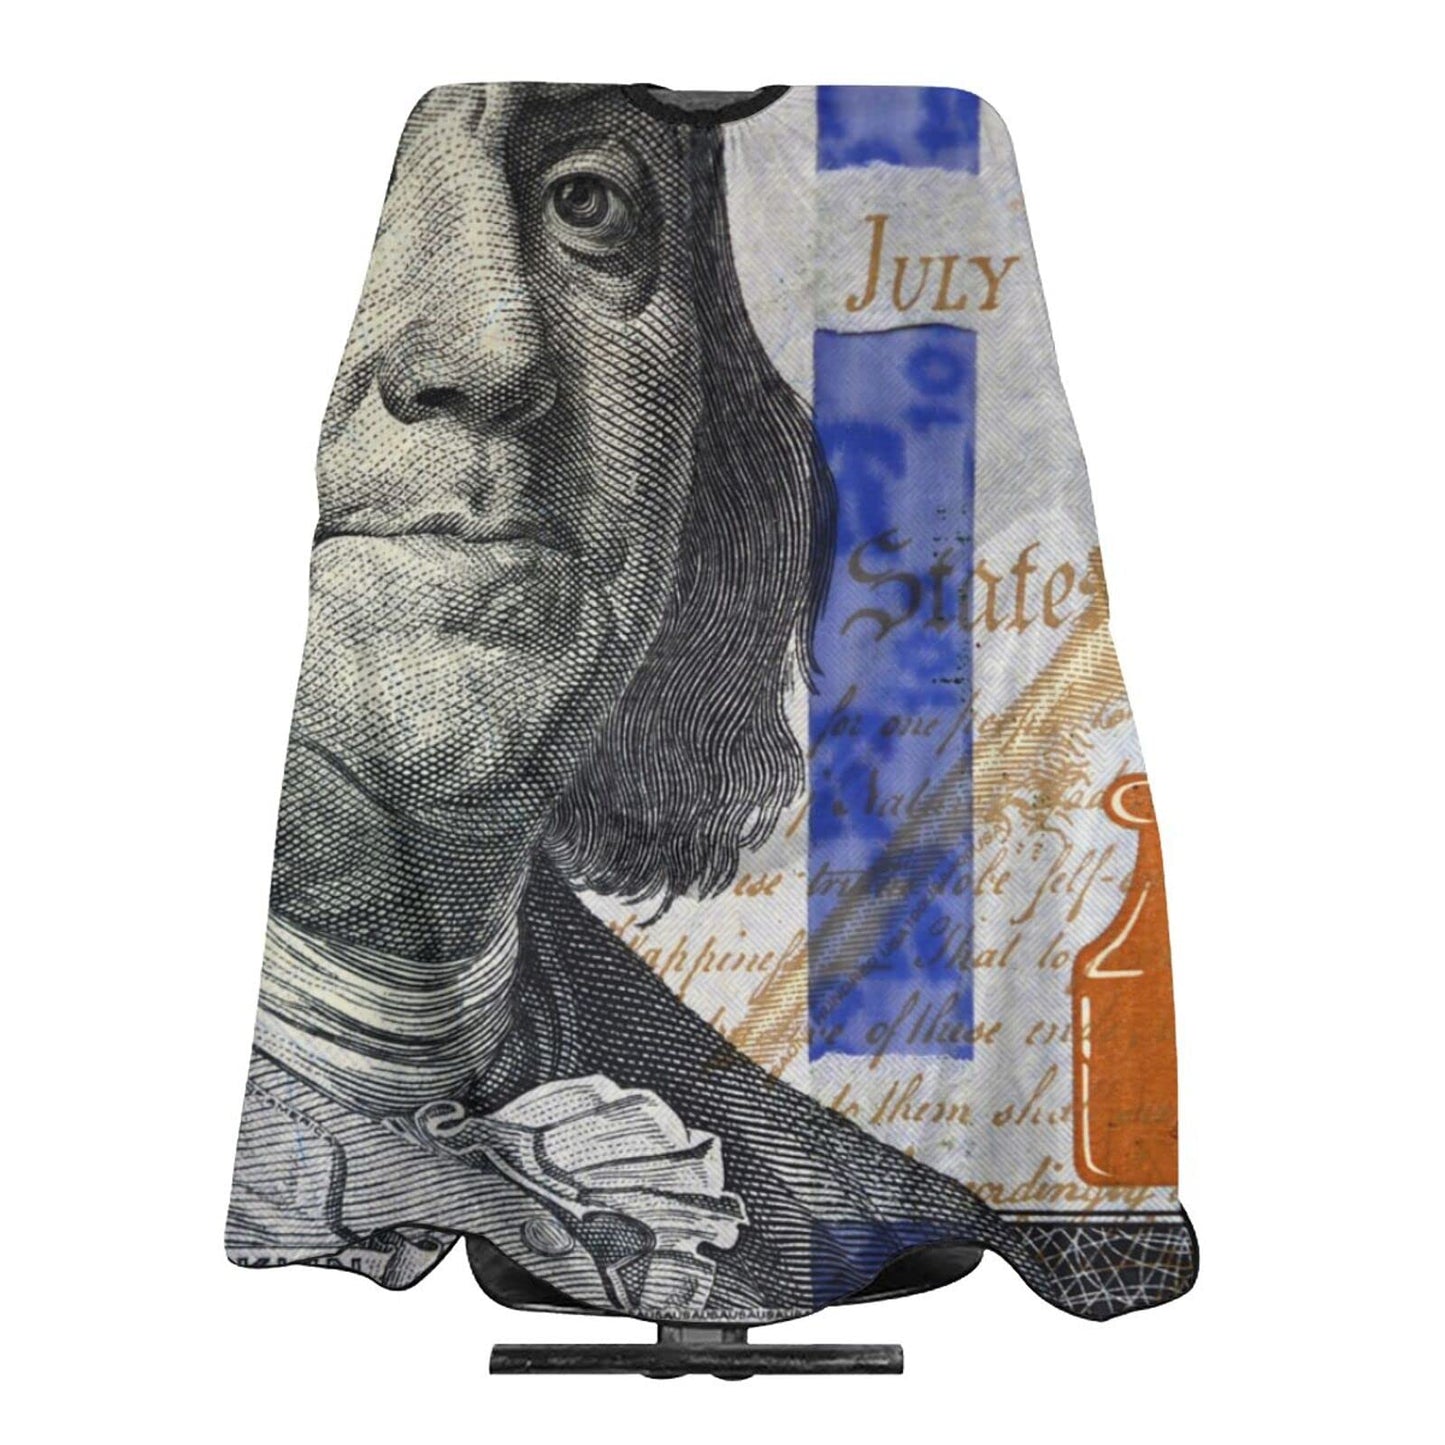 Dollar Bill Cash Barber Cape One Hundred Dollars Waterproof Haircut Apron Cover Up For Adults,55"X66"